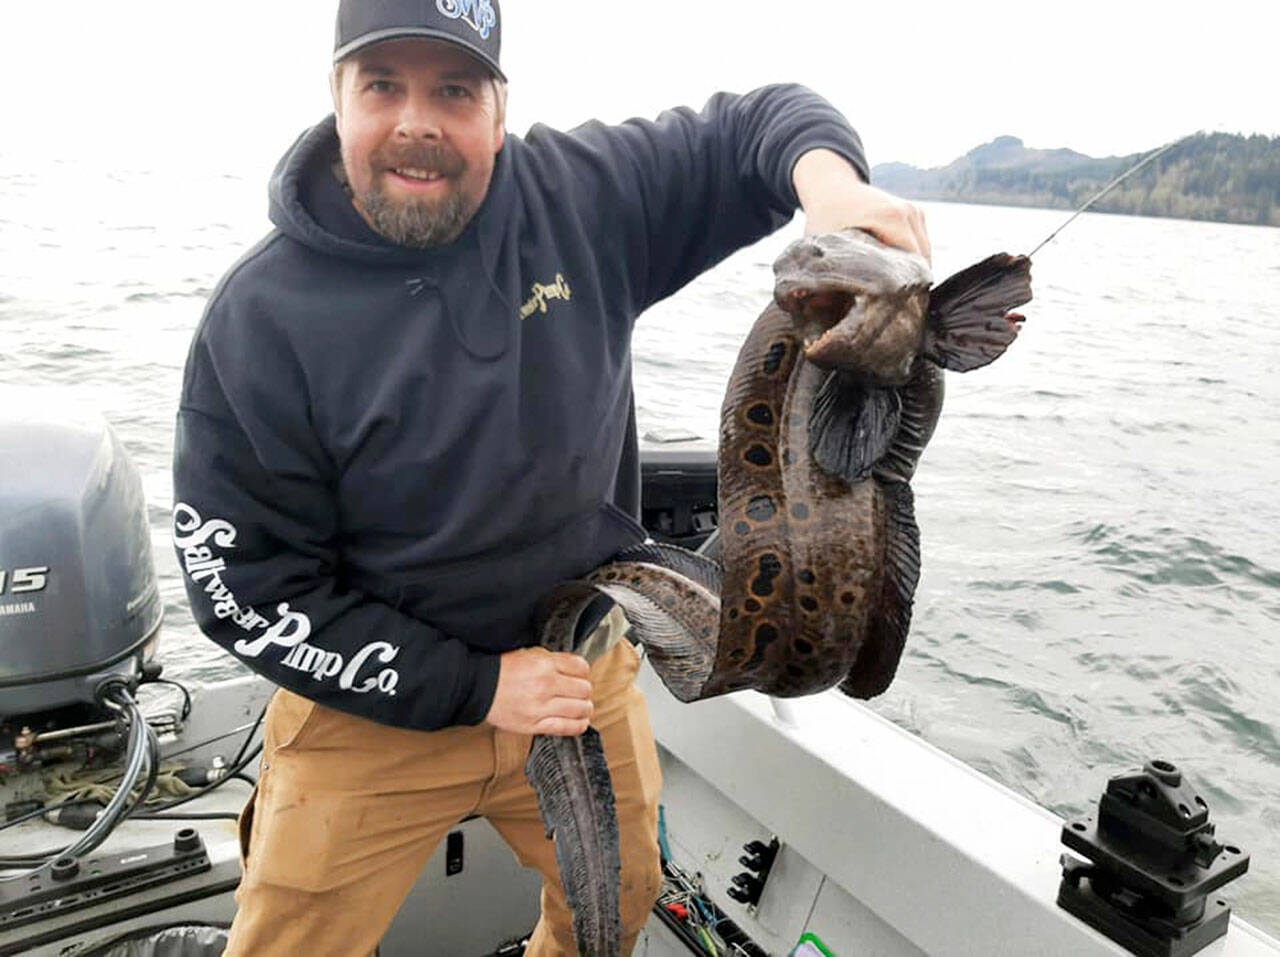 Marysville angler Nick VandenBosch caught this wolf eel, a member of the wolffish family, while fishing off of Neah Bay last weekend.